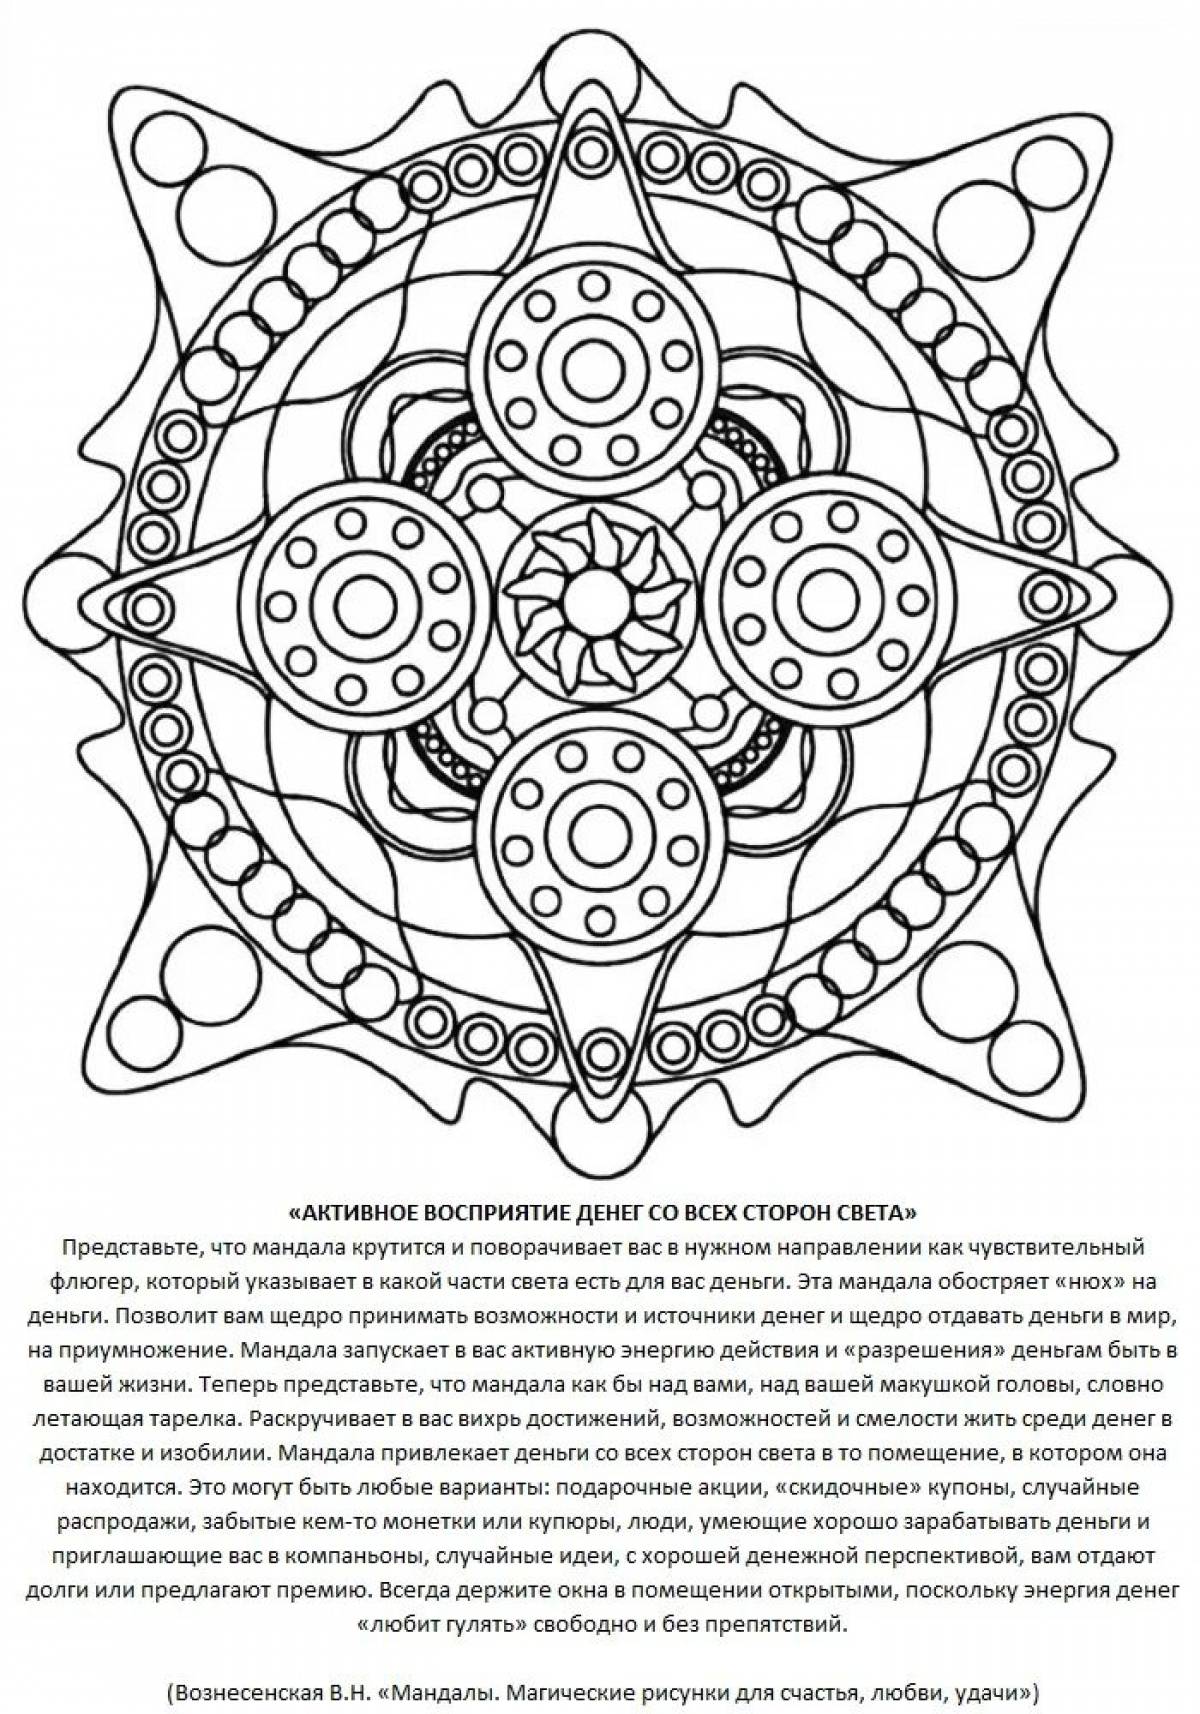 Mandala for good luck and success in everything #9